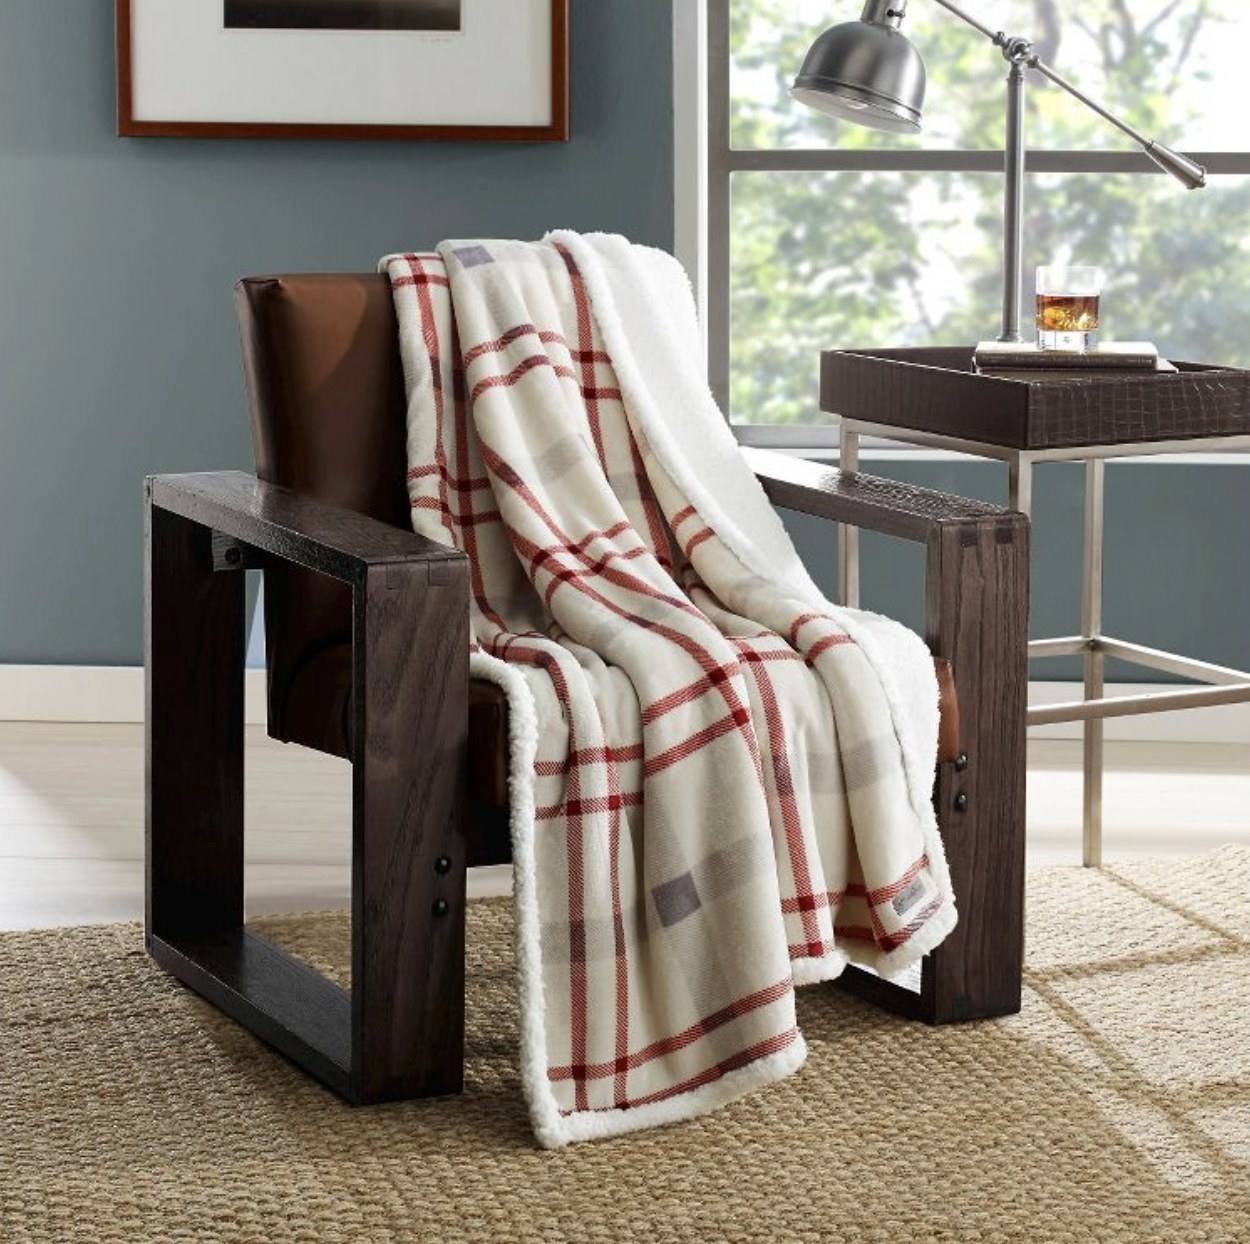 The throw draped over a chair